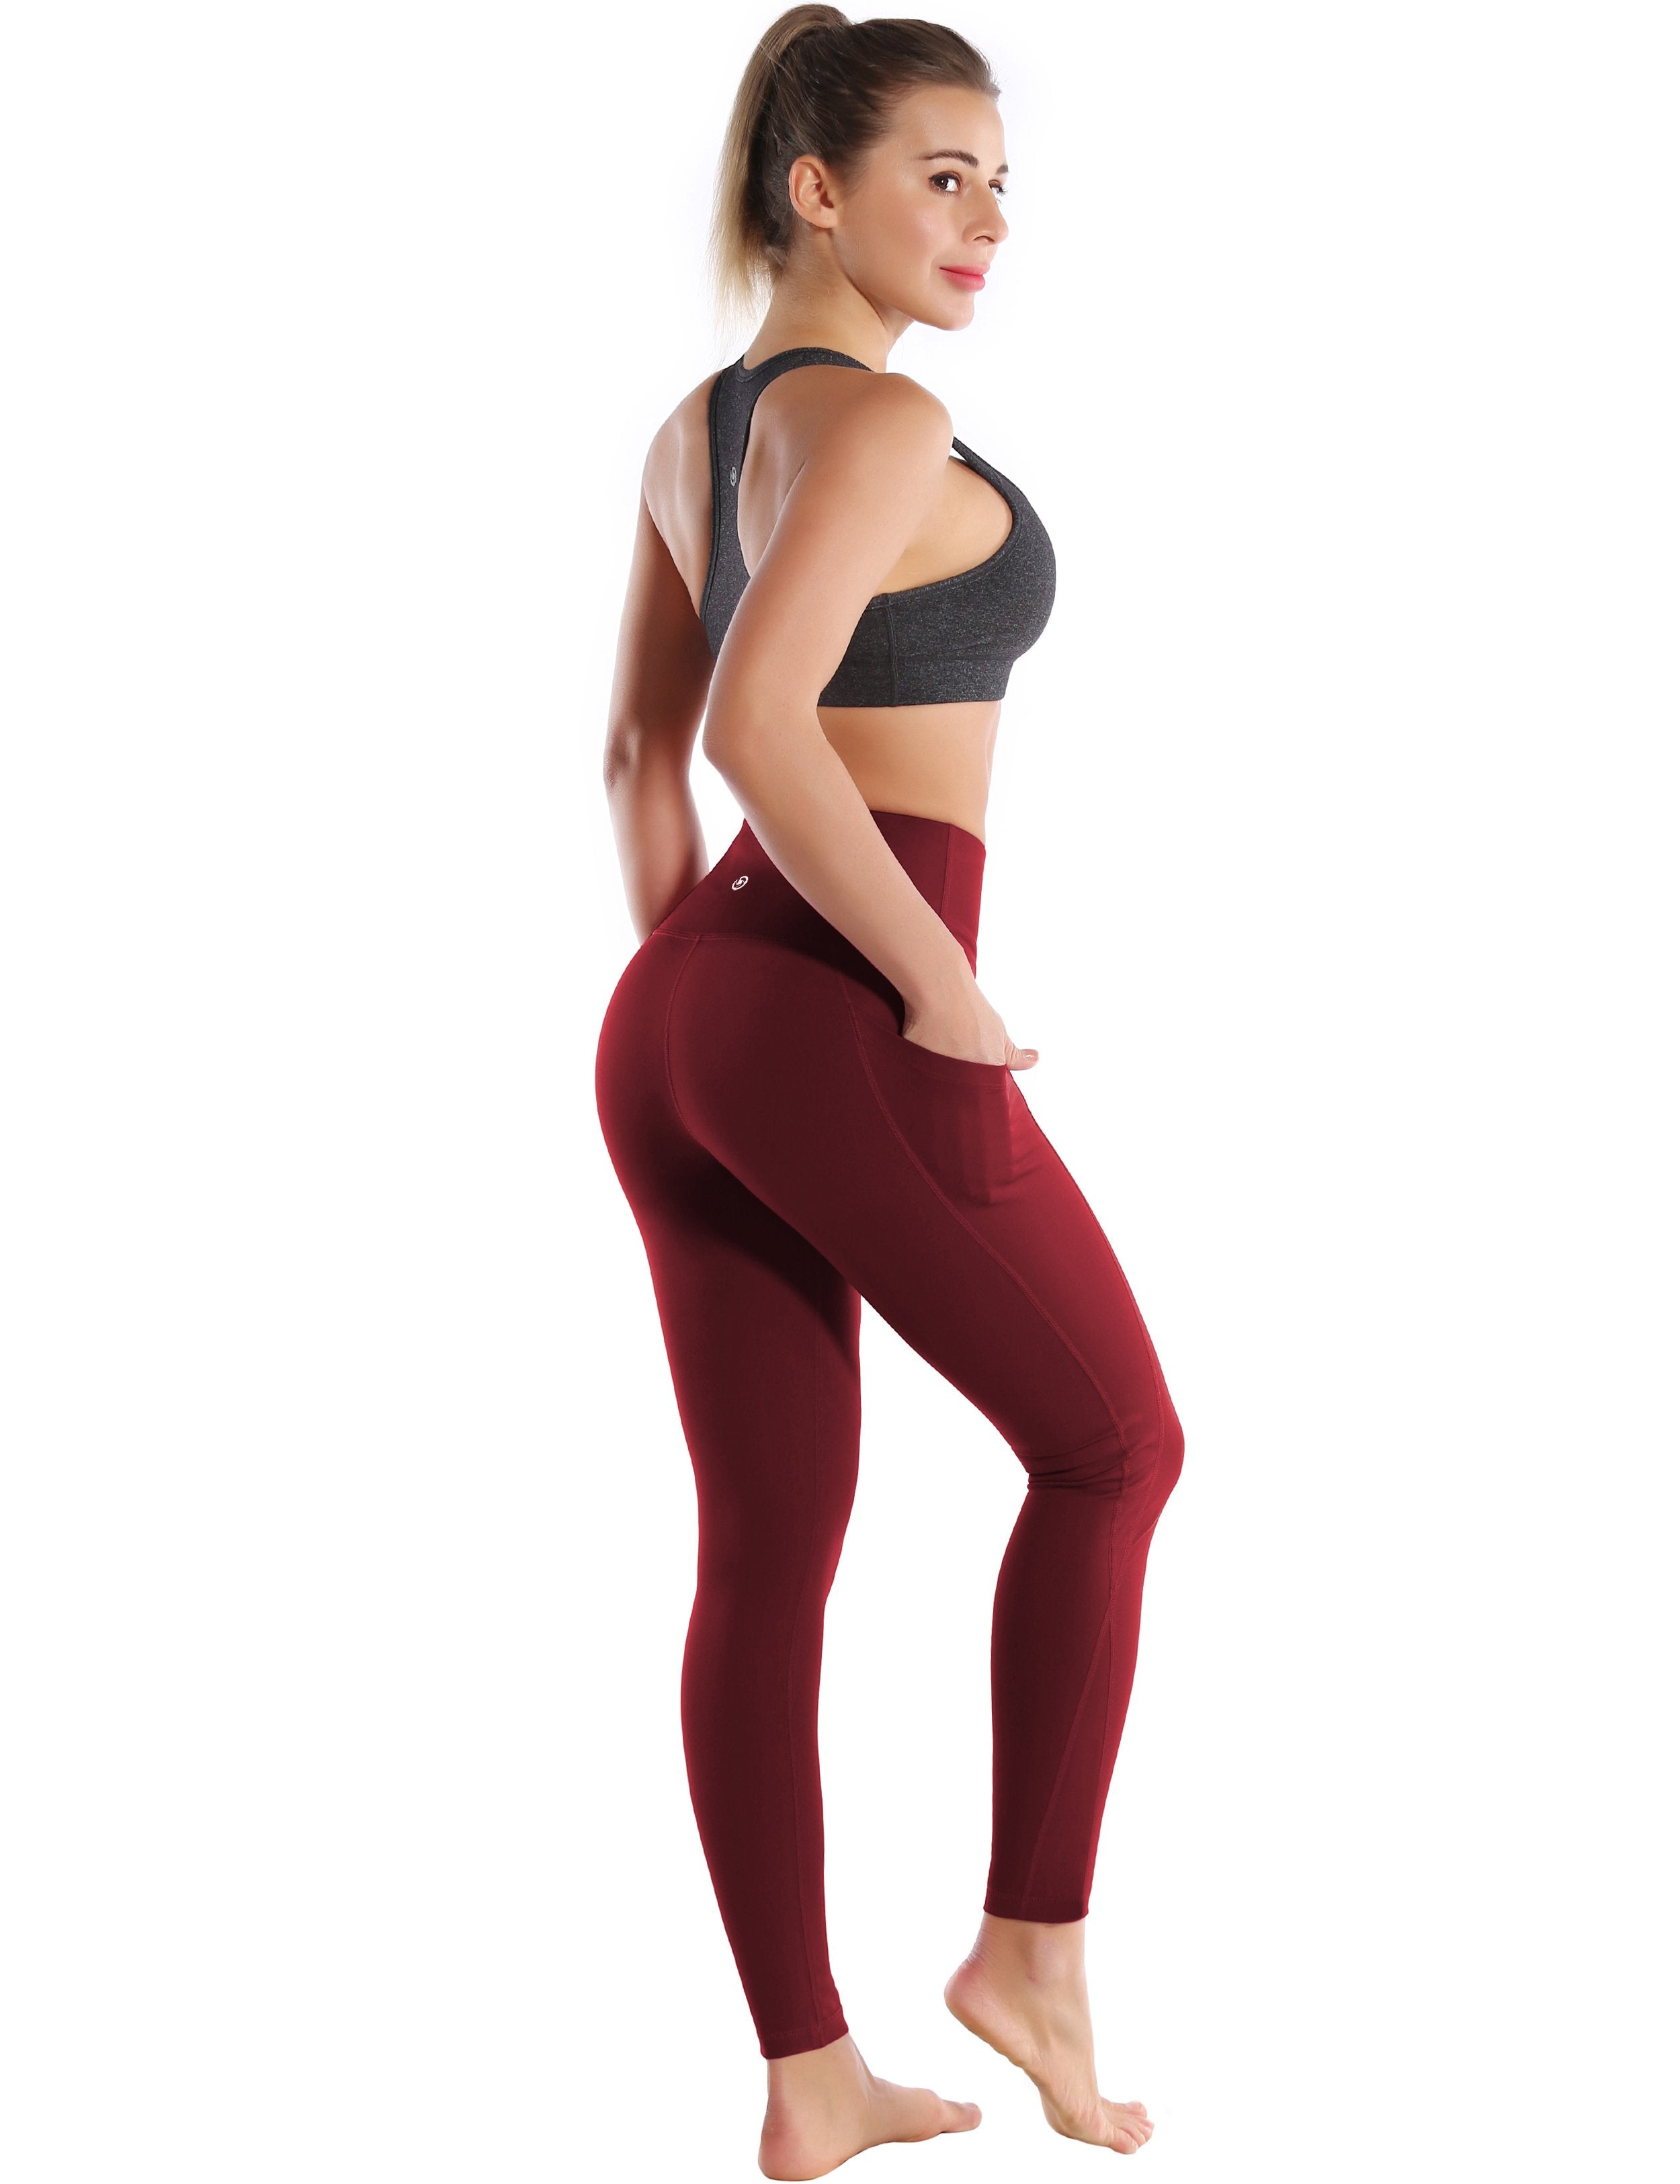 High Waist Side Pockets Plus Size Pants cherryred 75% Nylon, 25% Spandex Fabric doesn't attract lint easily 4-way stretch No see-through Moisture-wicking Tummy control Inner pocket